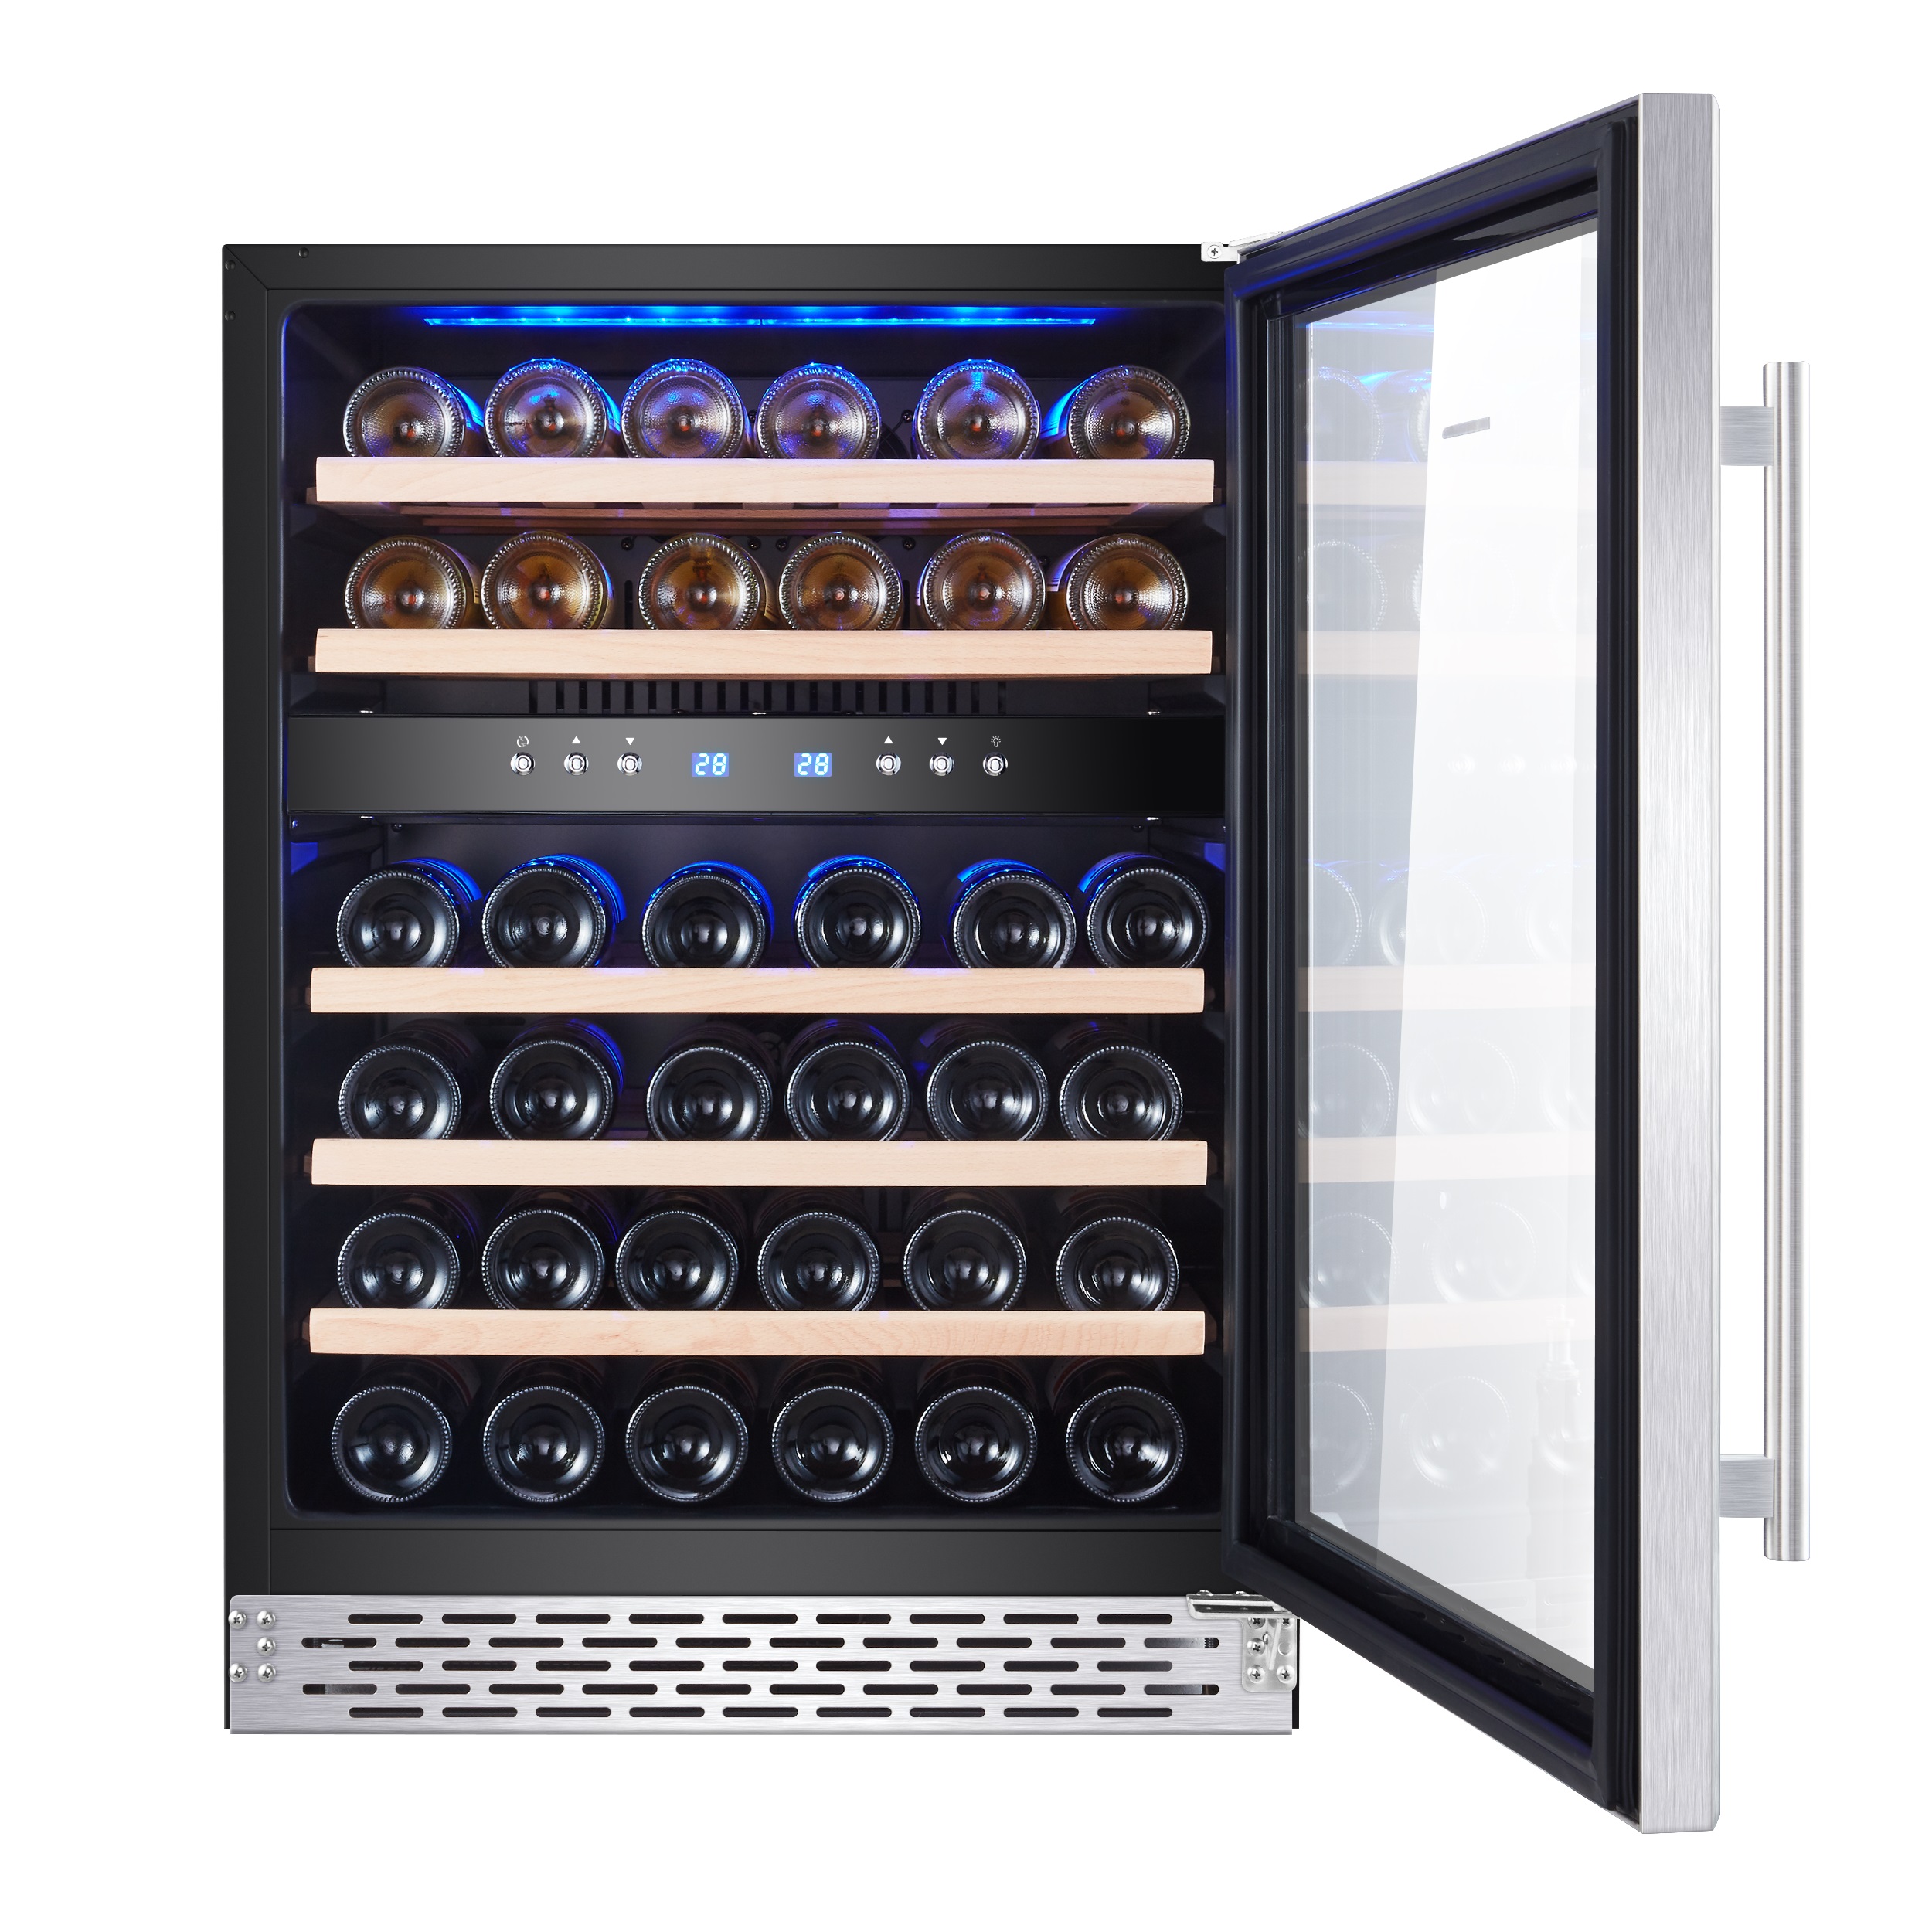 Phiestina 46 Bottle Dual Zone Built-in Wine Cooler - image 4 of 12